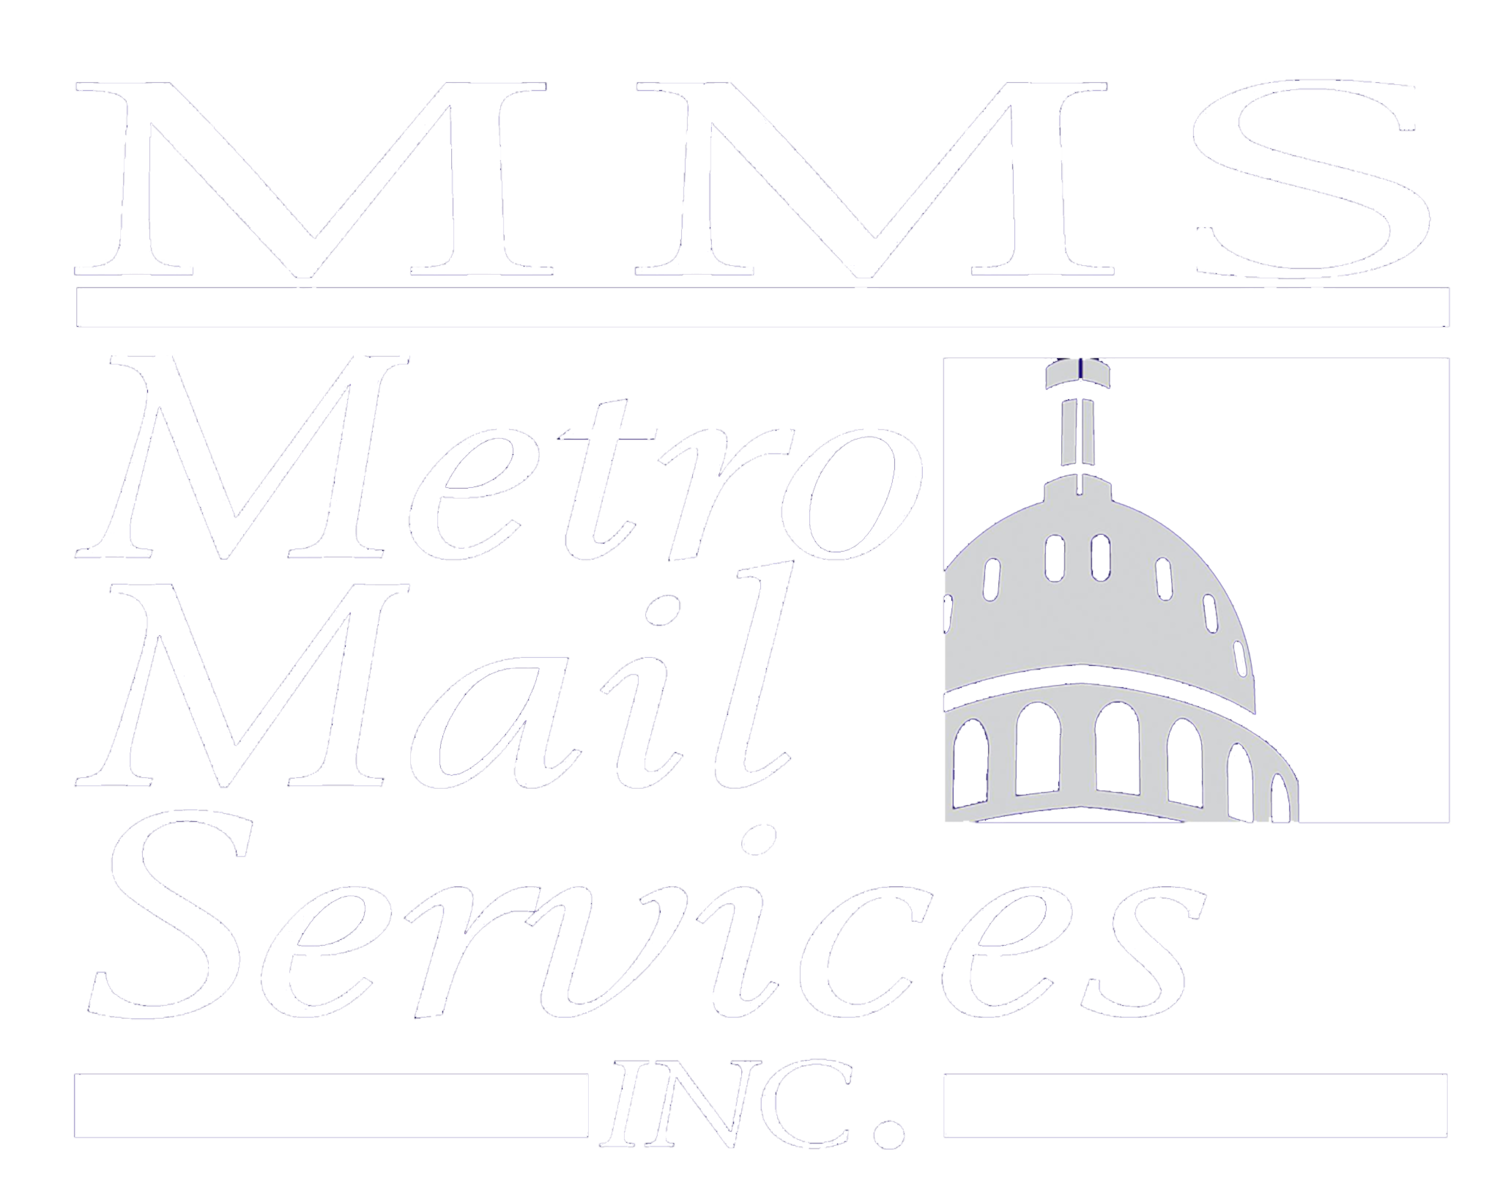 Metro Mail Services, Inc. - Providing Postage Meters, Copiers and Shredders in the Washington D.C. Area